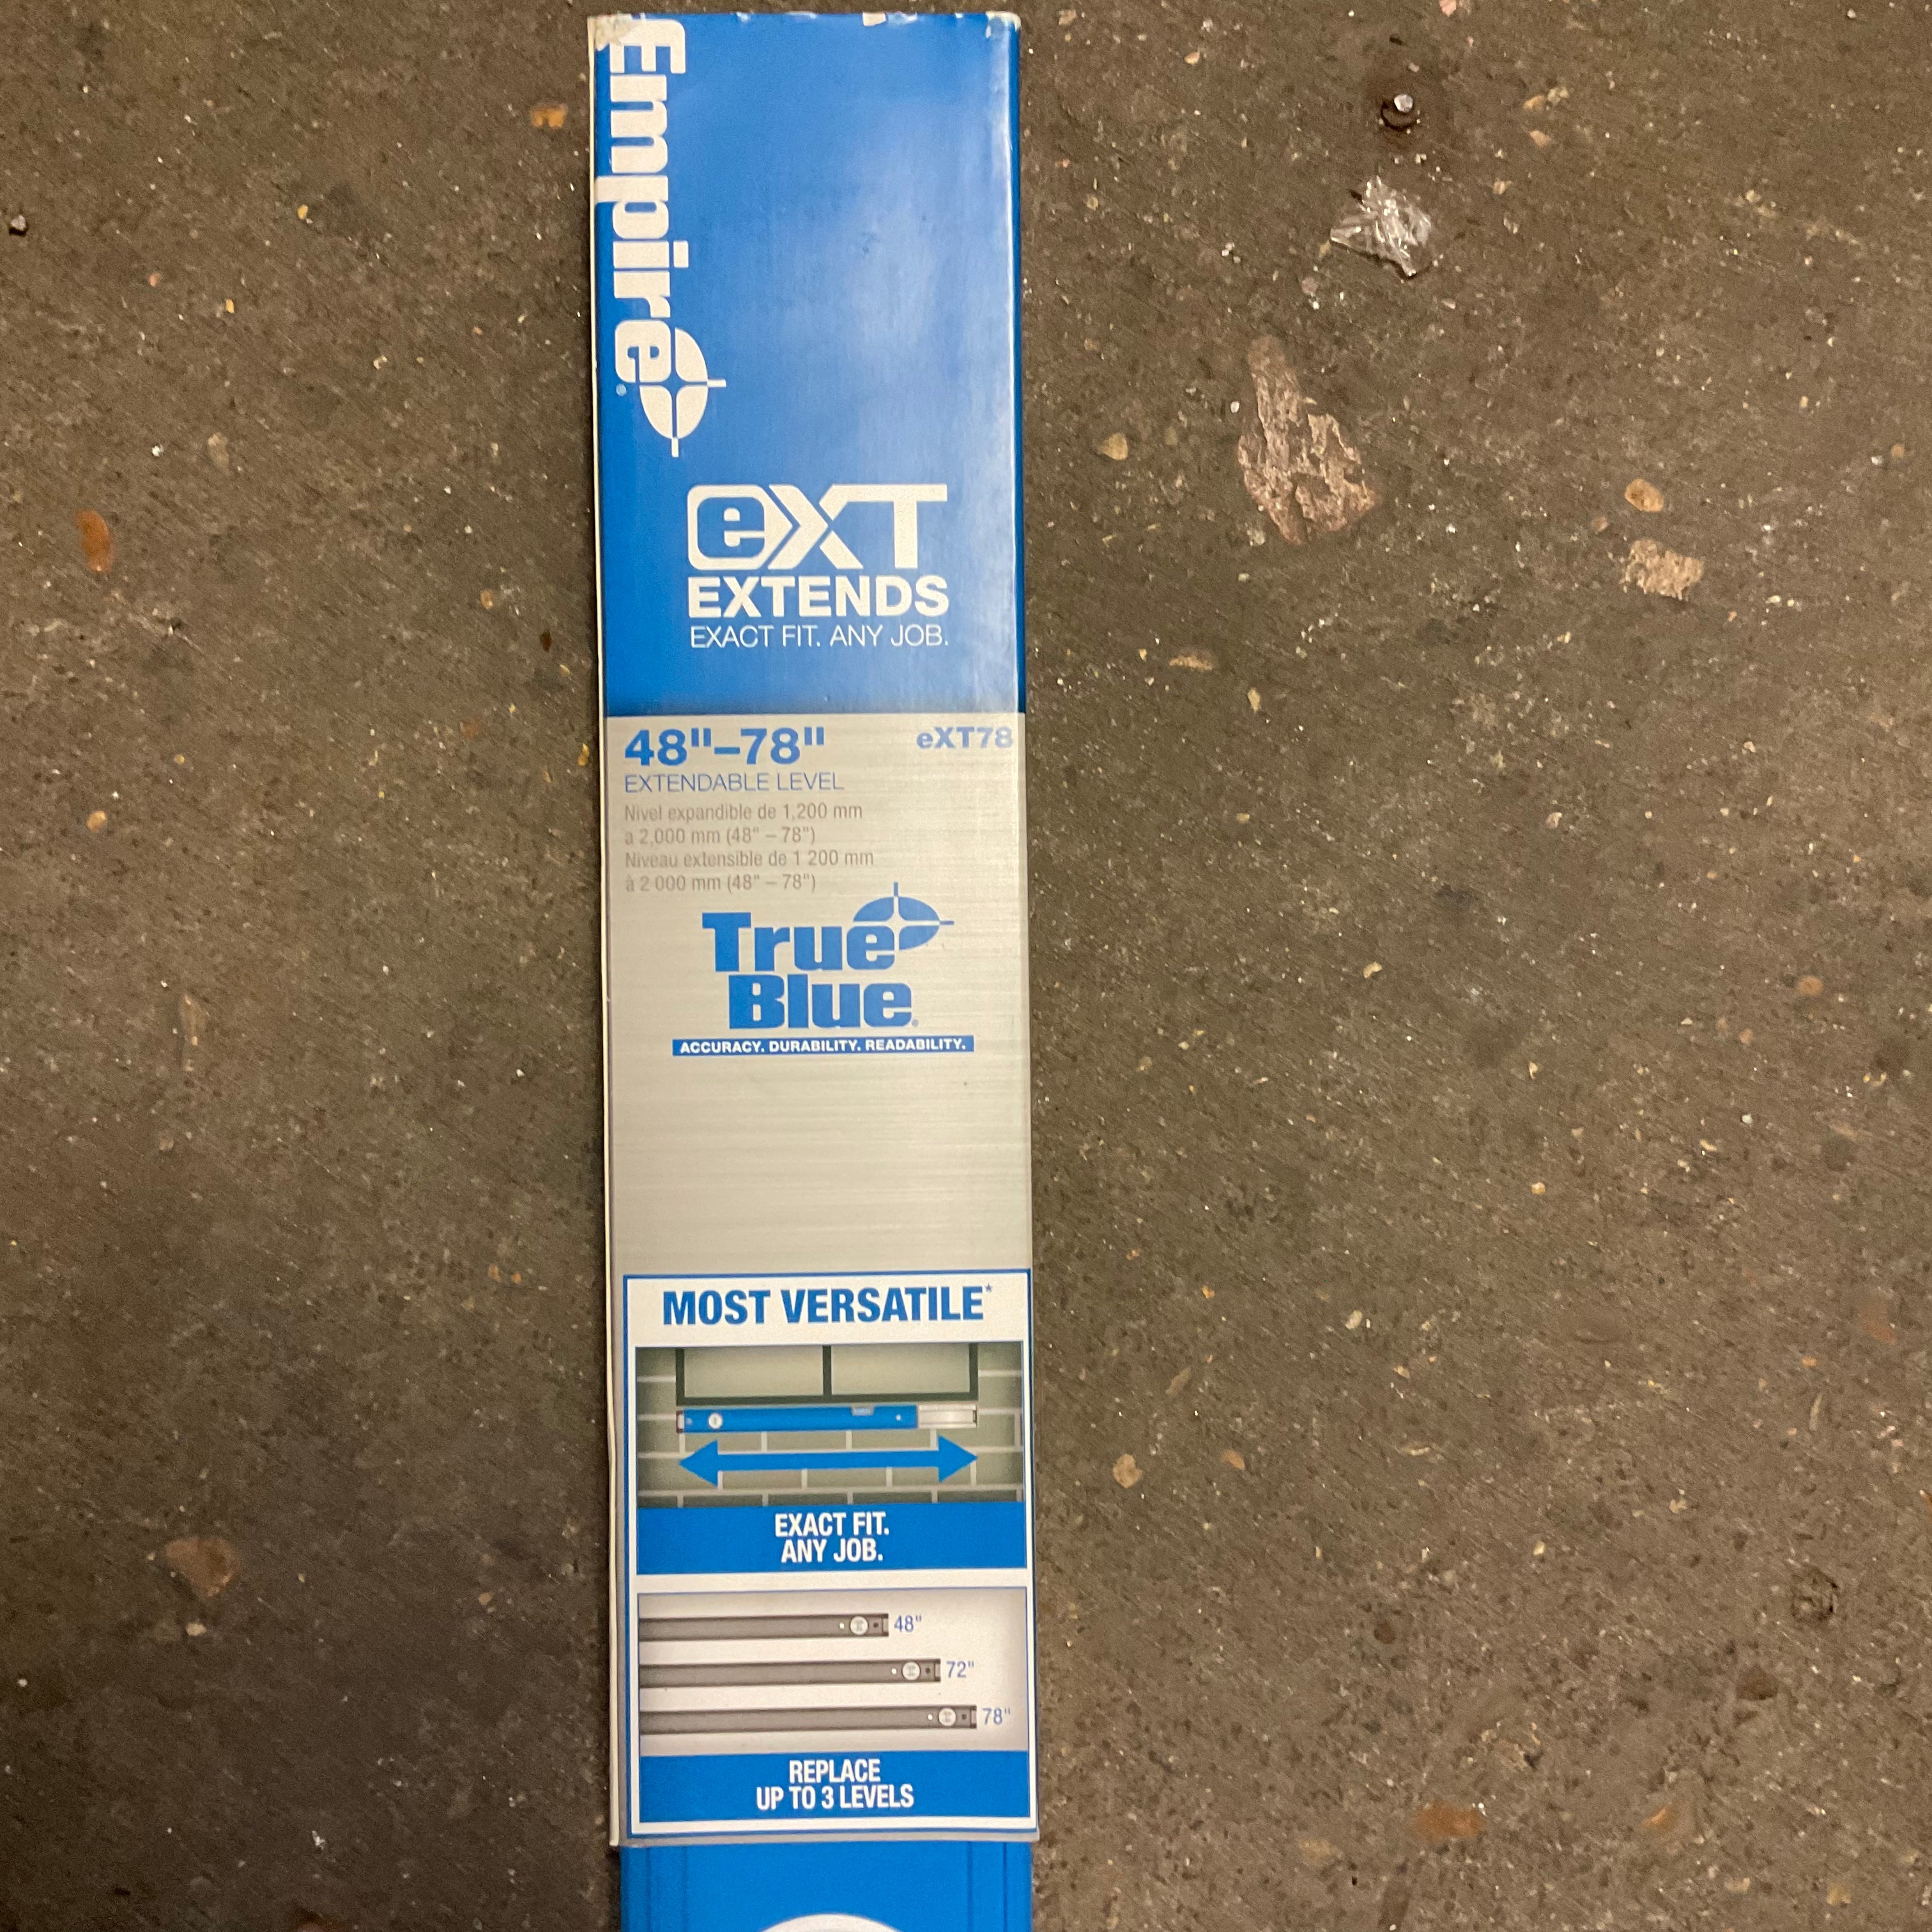 Empire 48 in. to 78 in. True Blue Extendable Box Level (7351226695918)